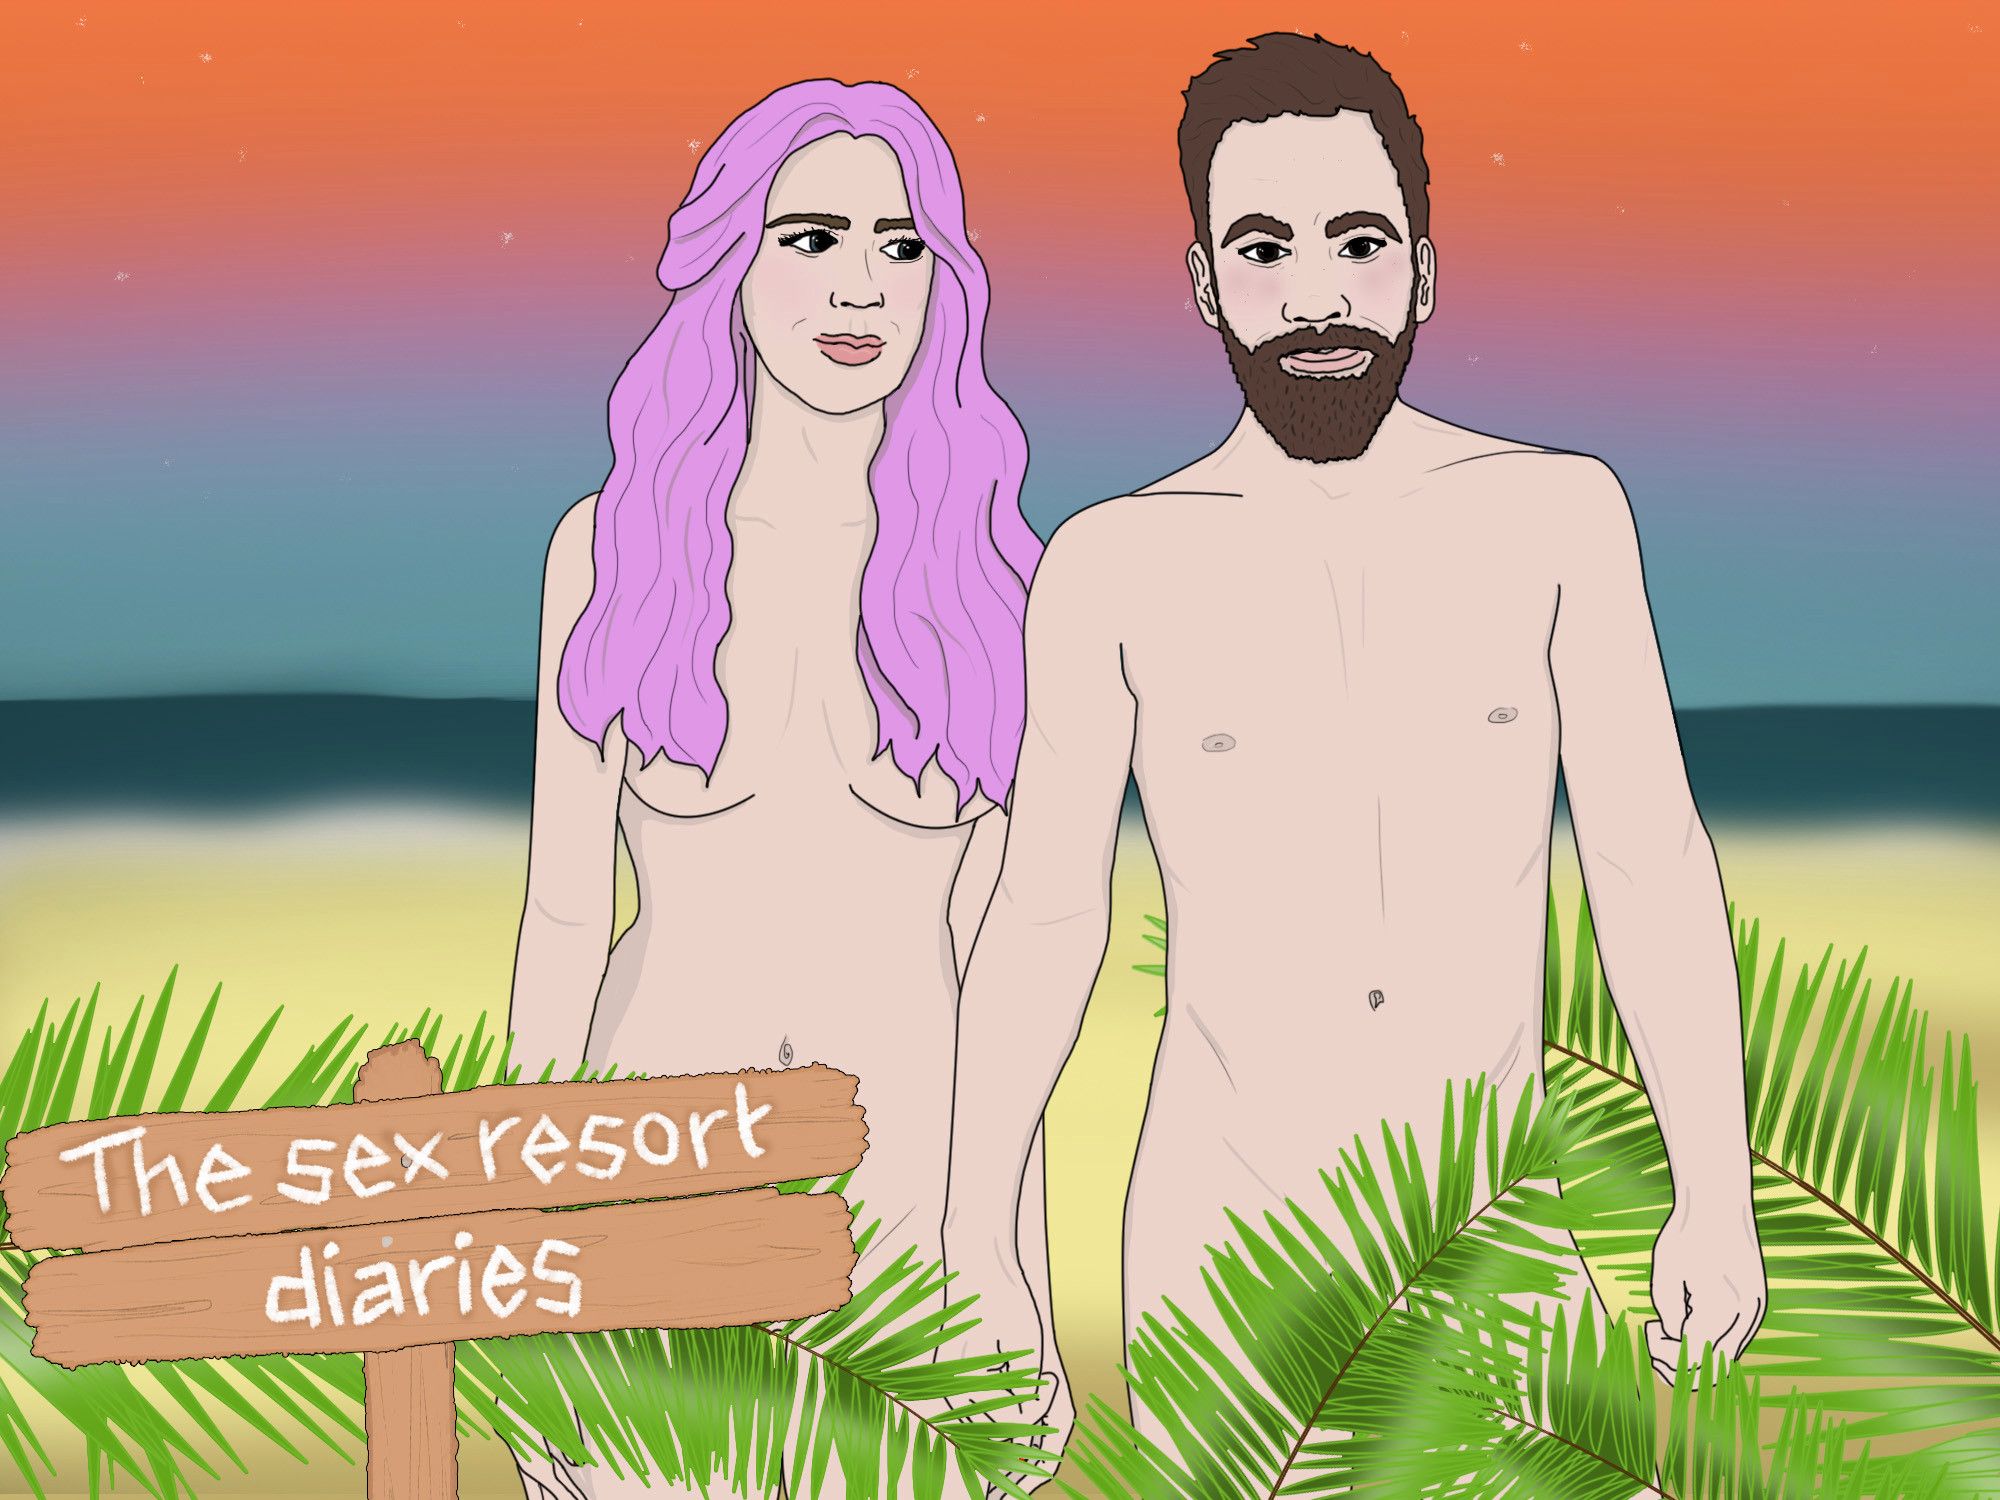 Sylvester recomended having couples nudist beach